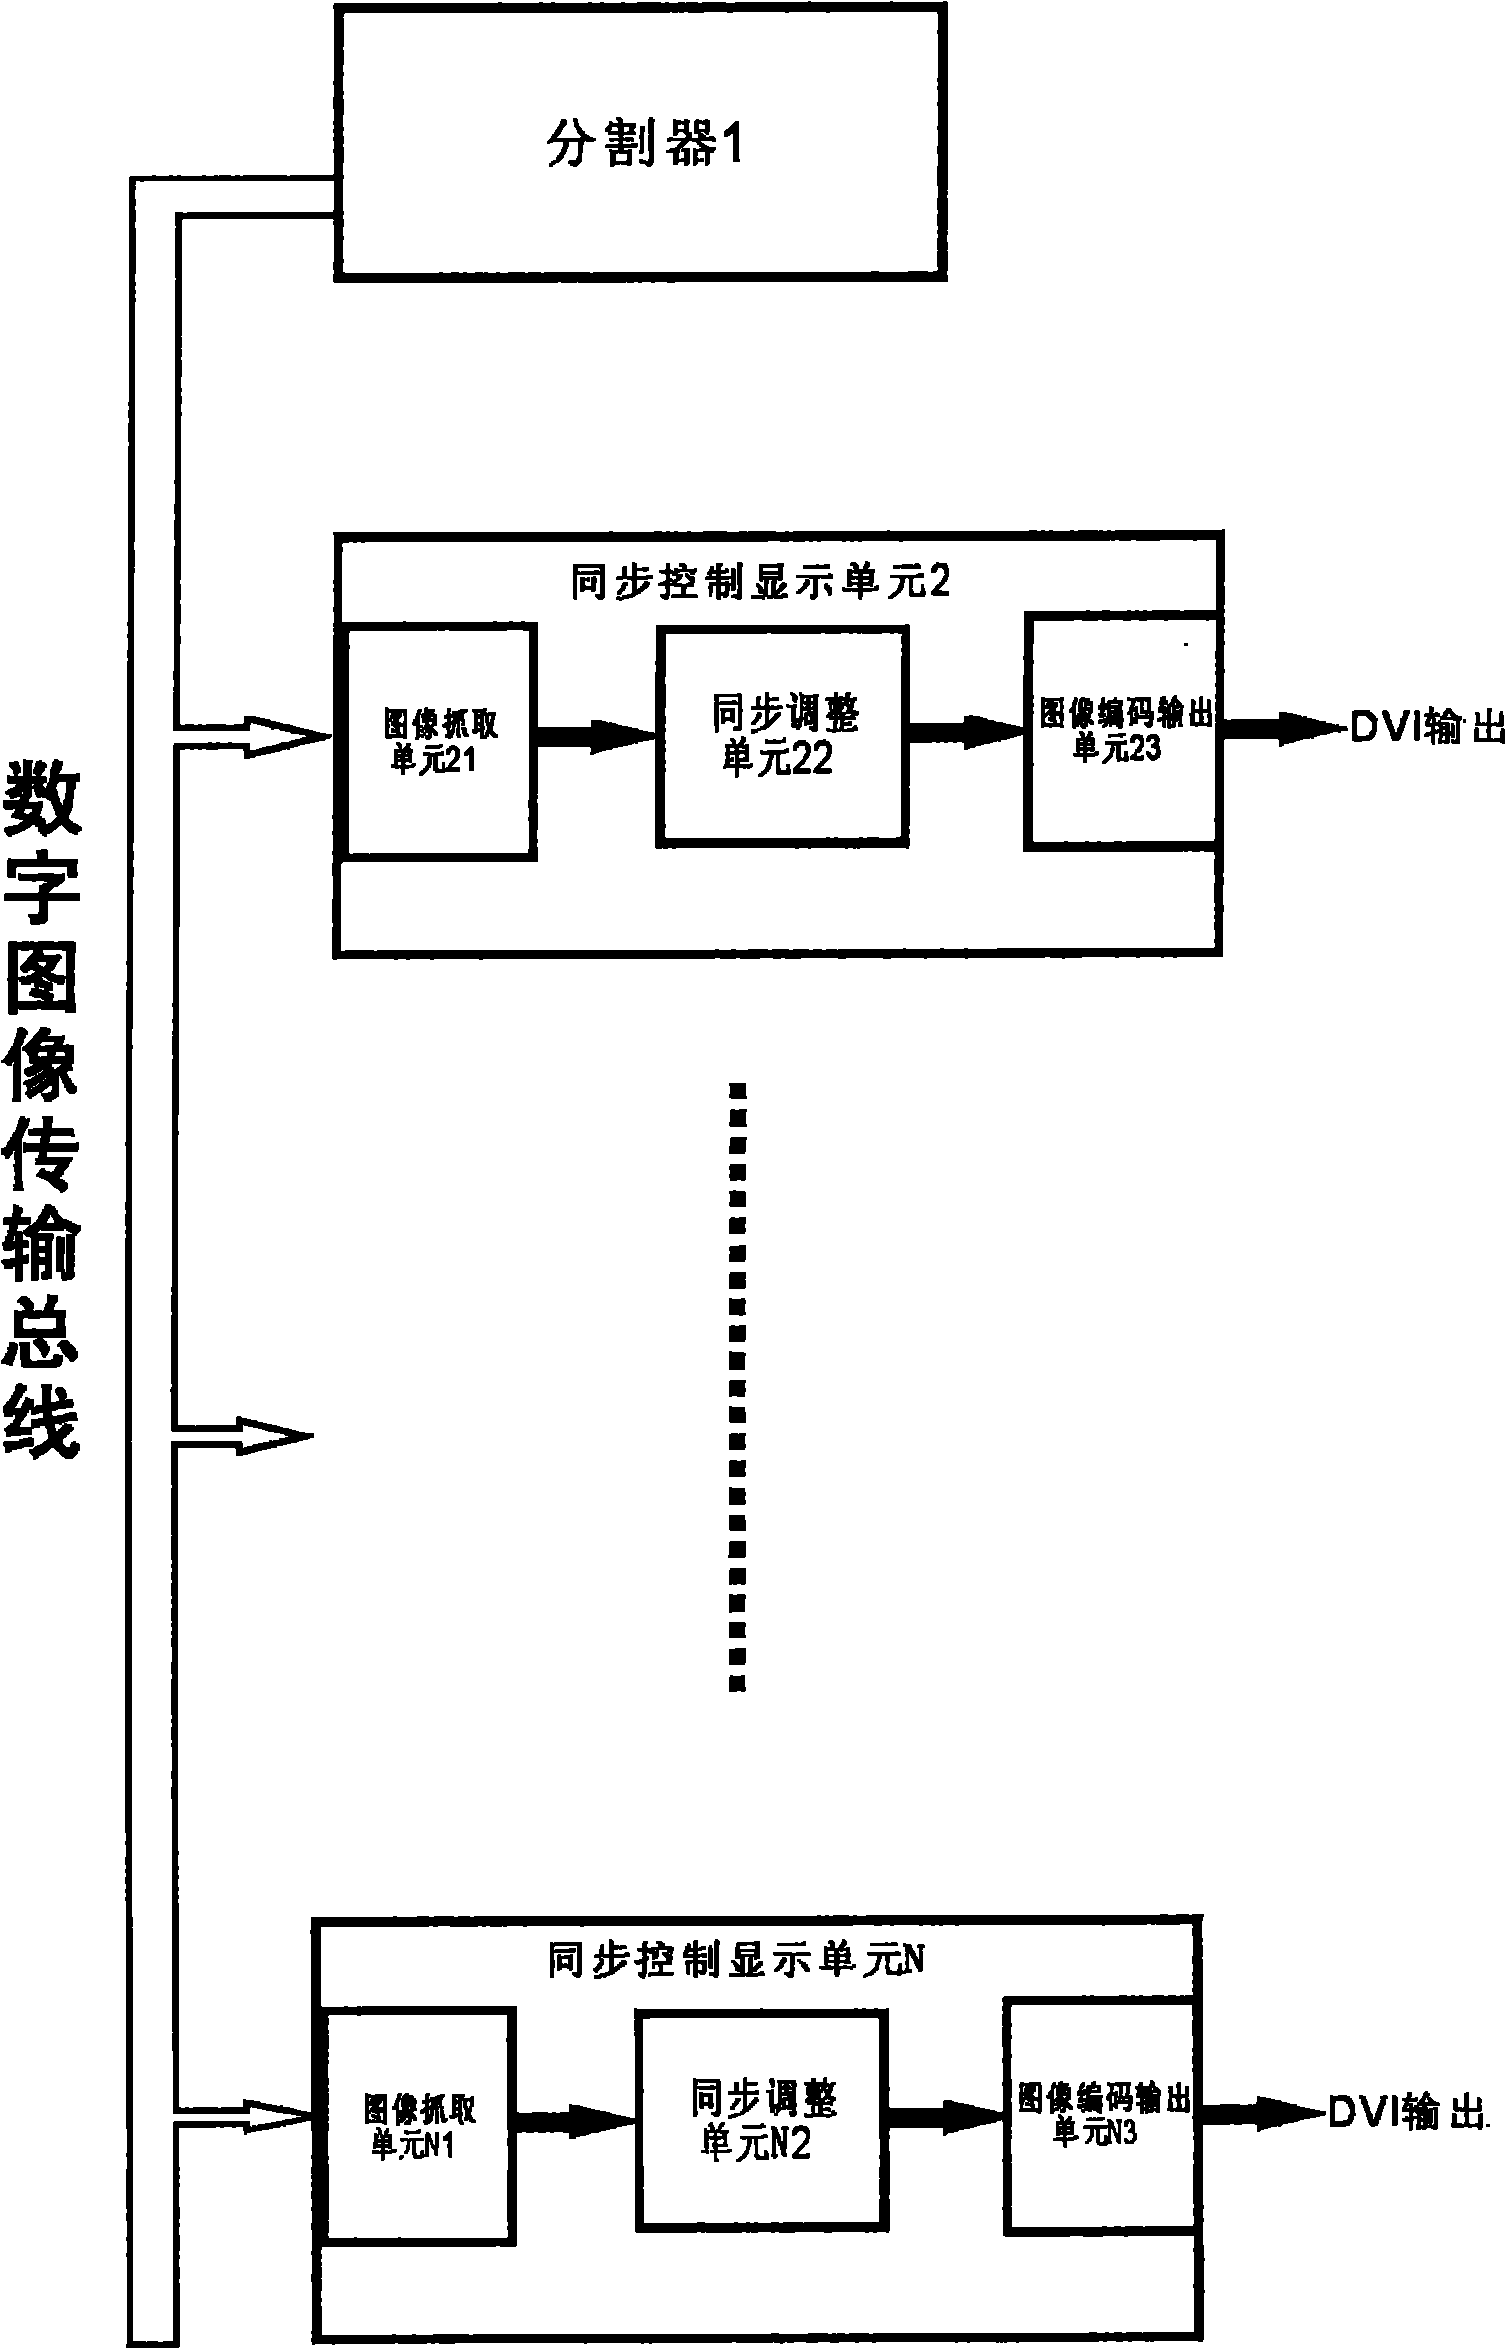 Method and device for simultaneously displaying multiple images in real time on full color LED dot matrix